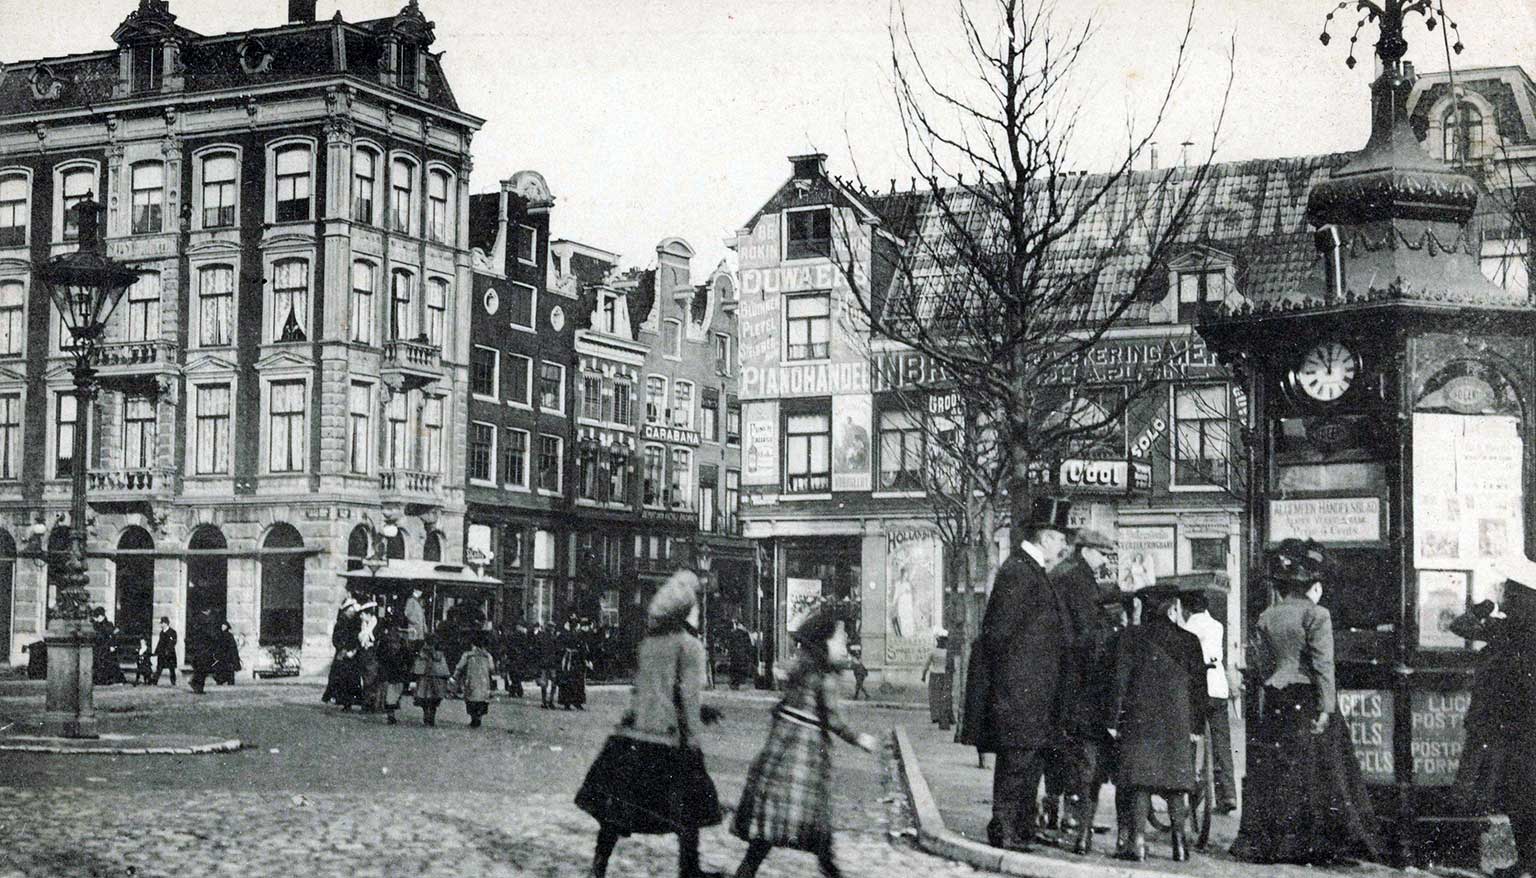 Leidseplein between 1890 and 1920, with newspaper stand